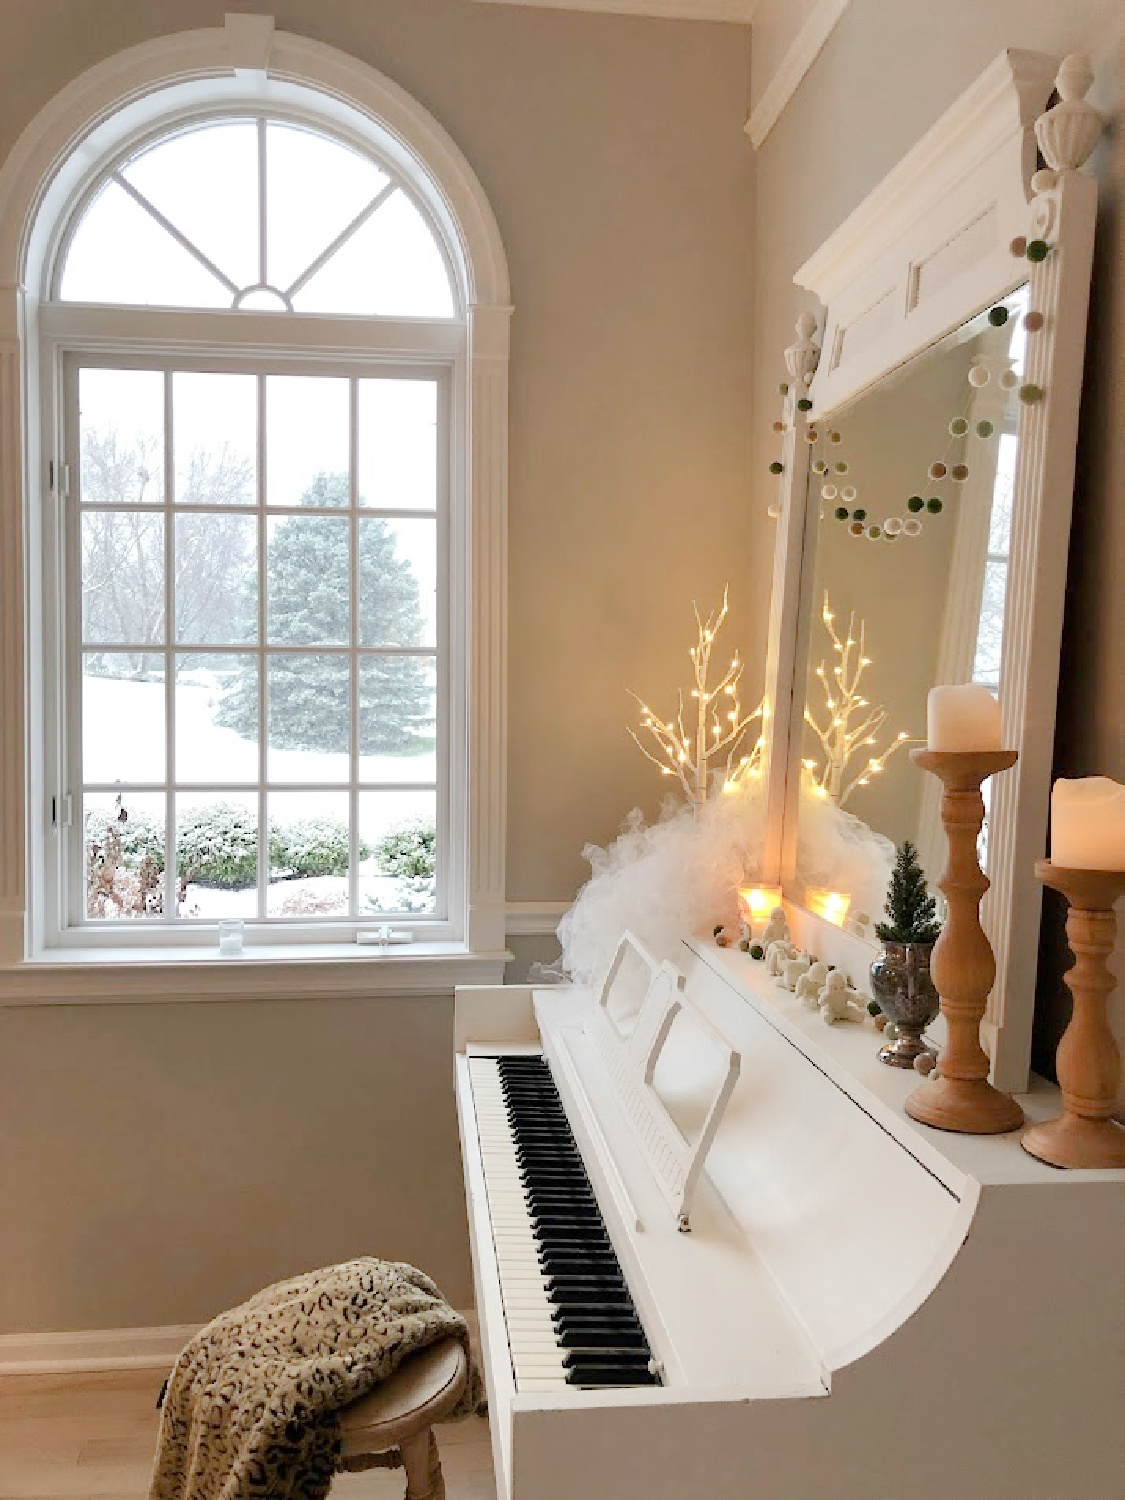 My vintage white piano decorated for Christmas and snow outside the arched window in the music room - Hello Lovely Studio.